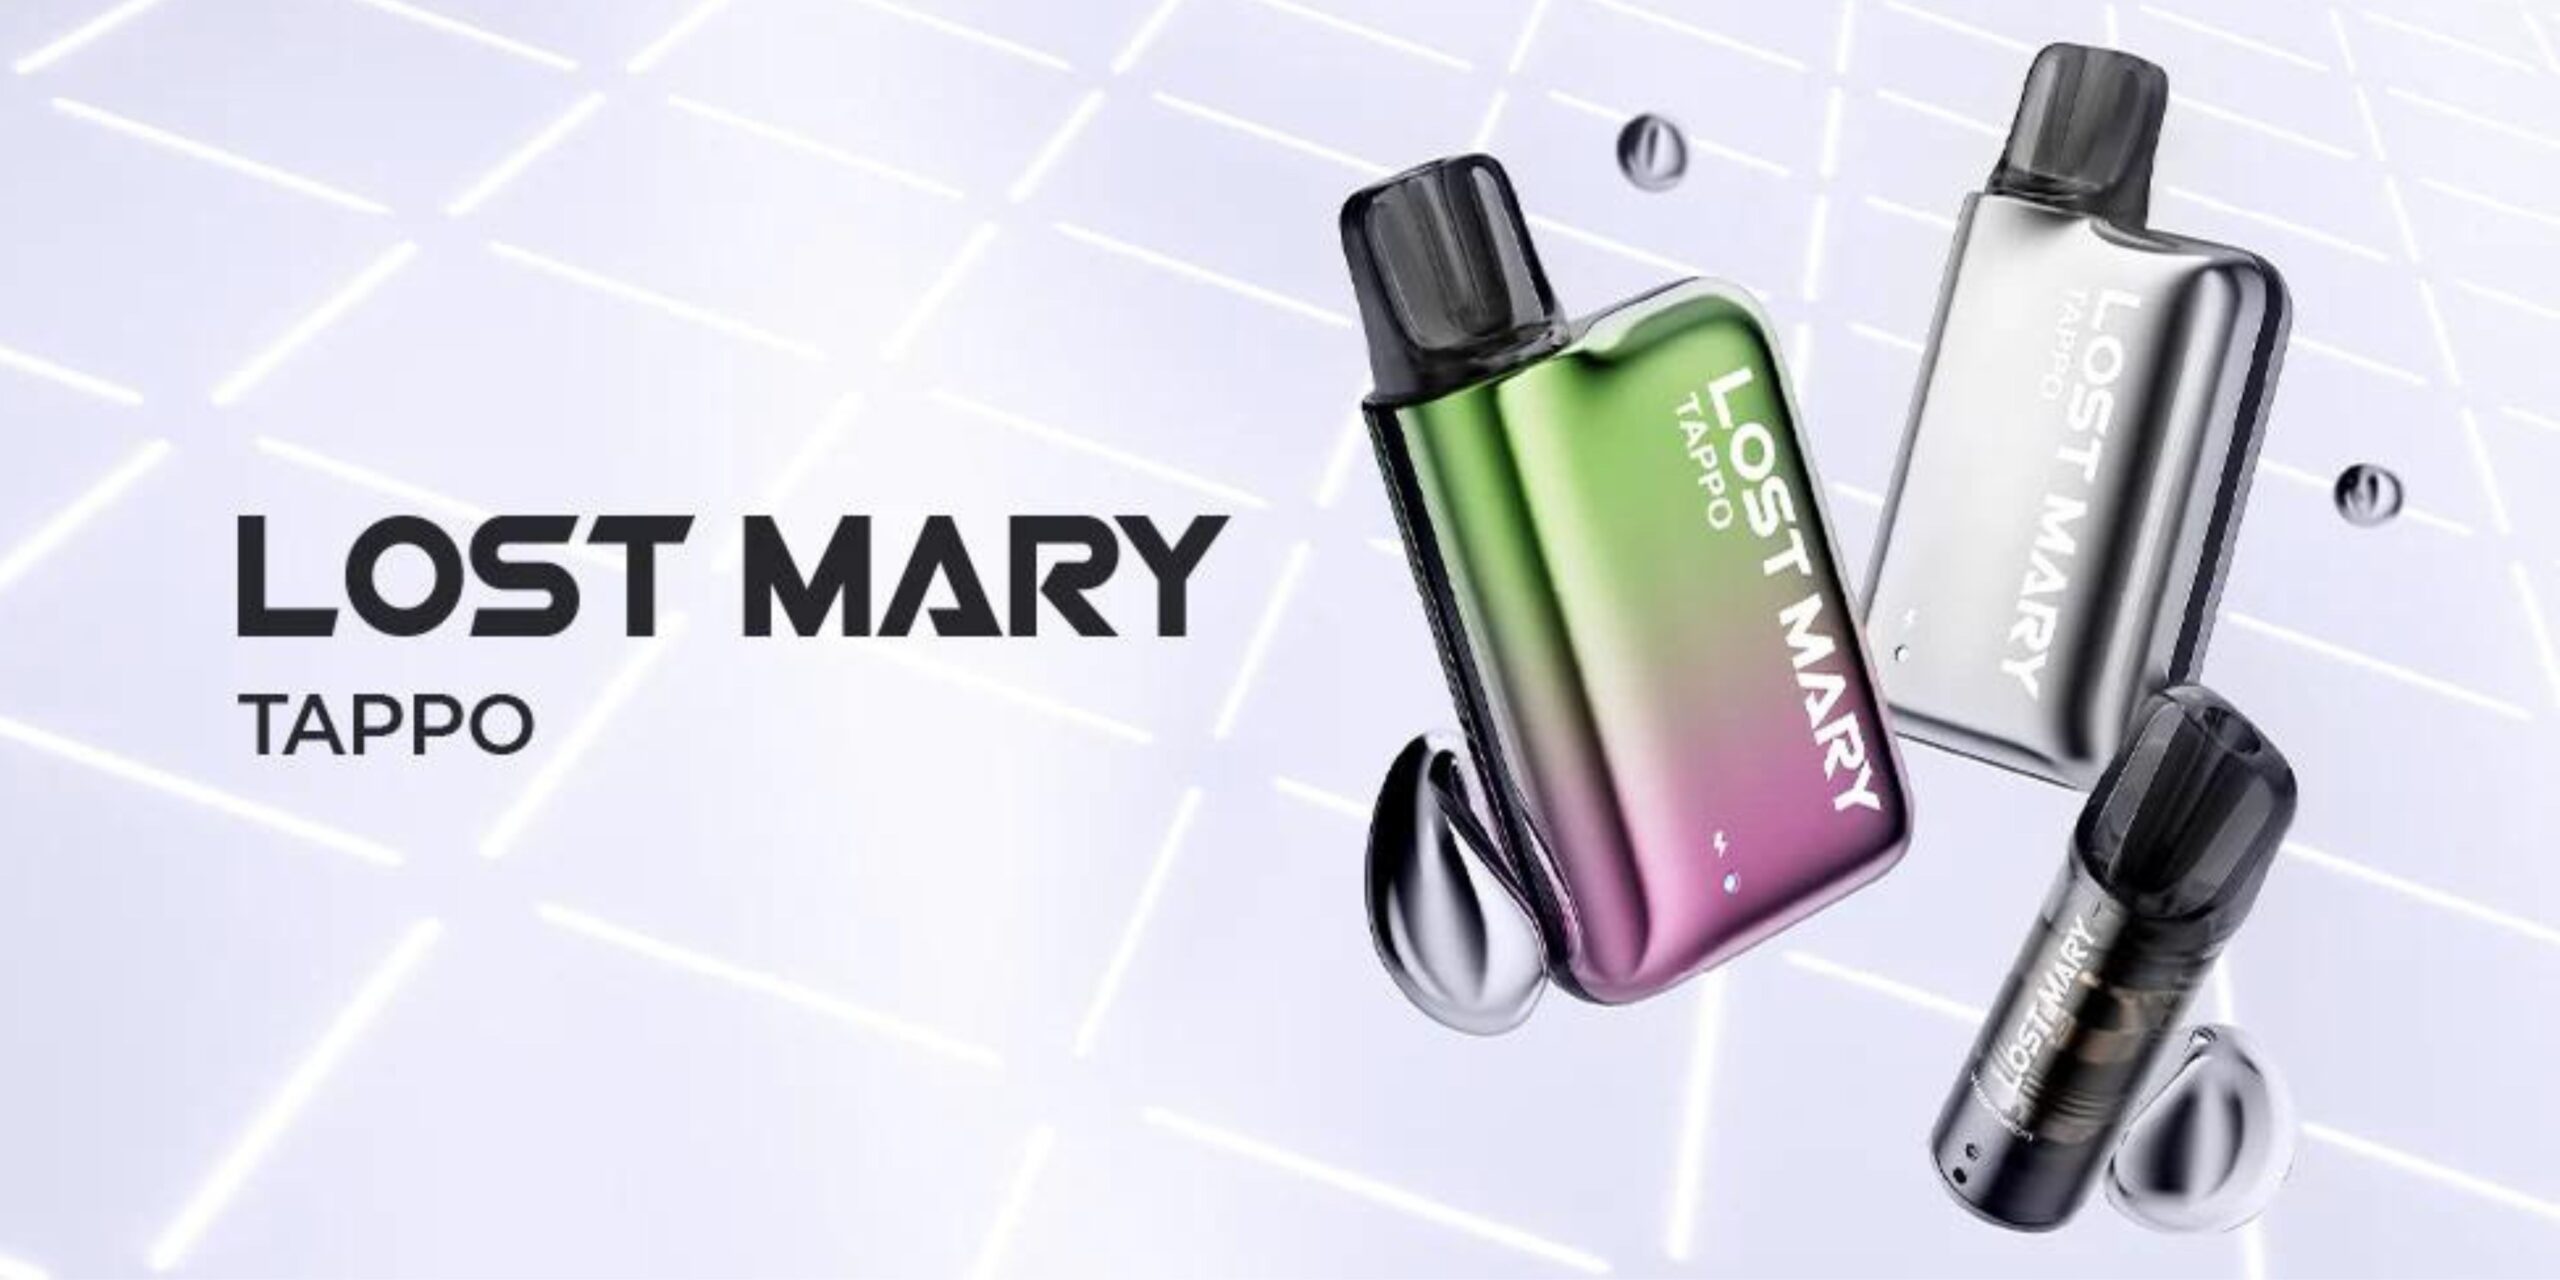 LOST MARY TAPPO – Maryturbo (Replacement Prefilled Pods) VAPING - XMANIA Ireland 15